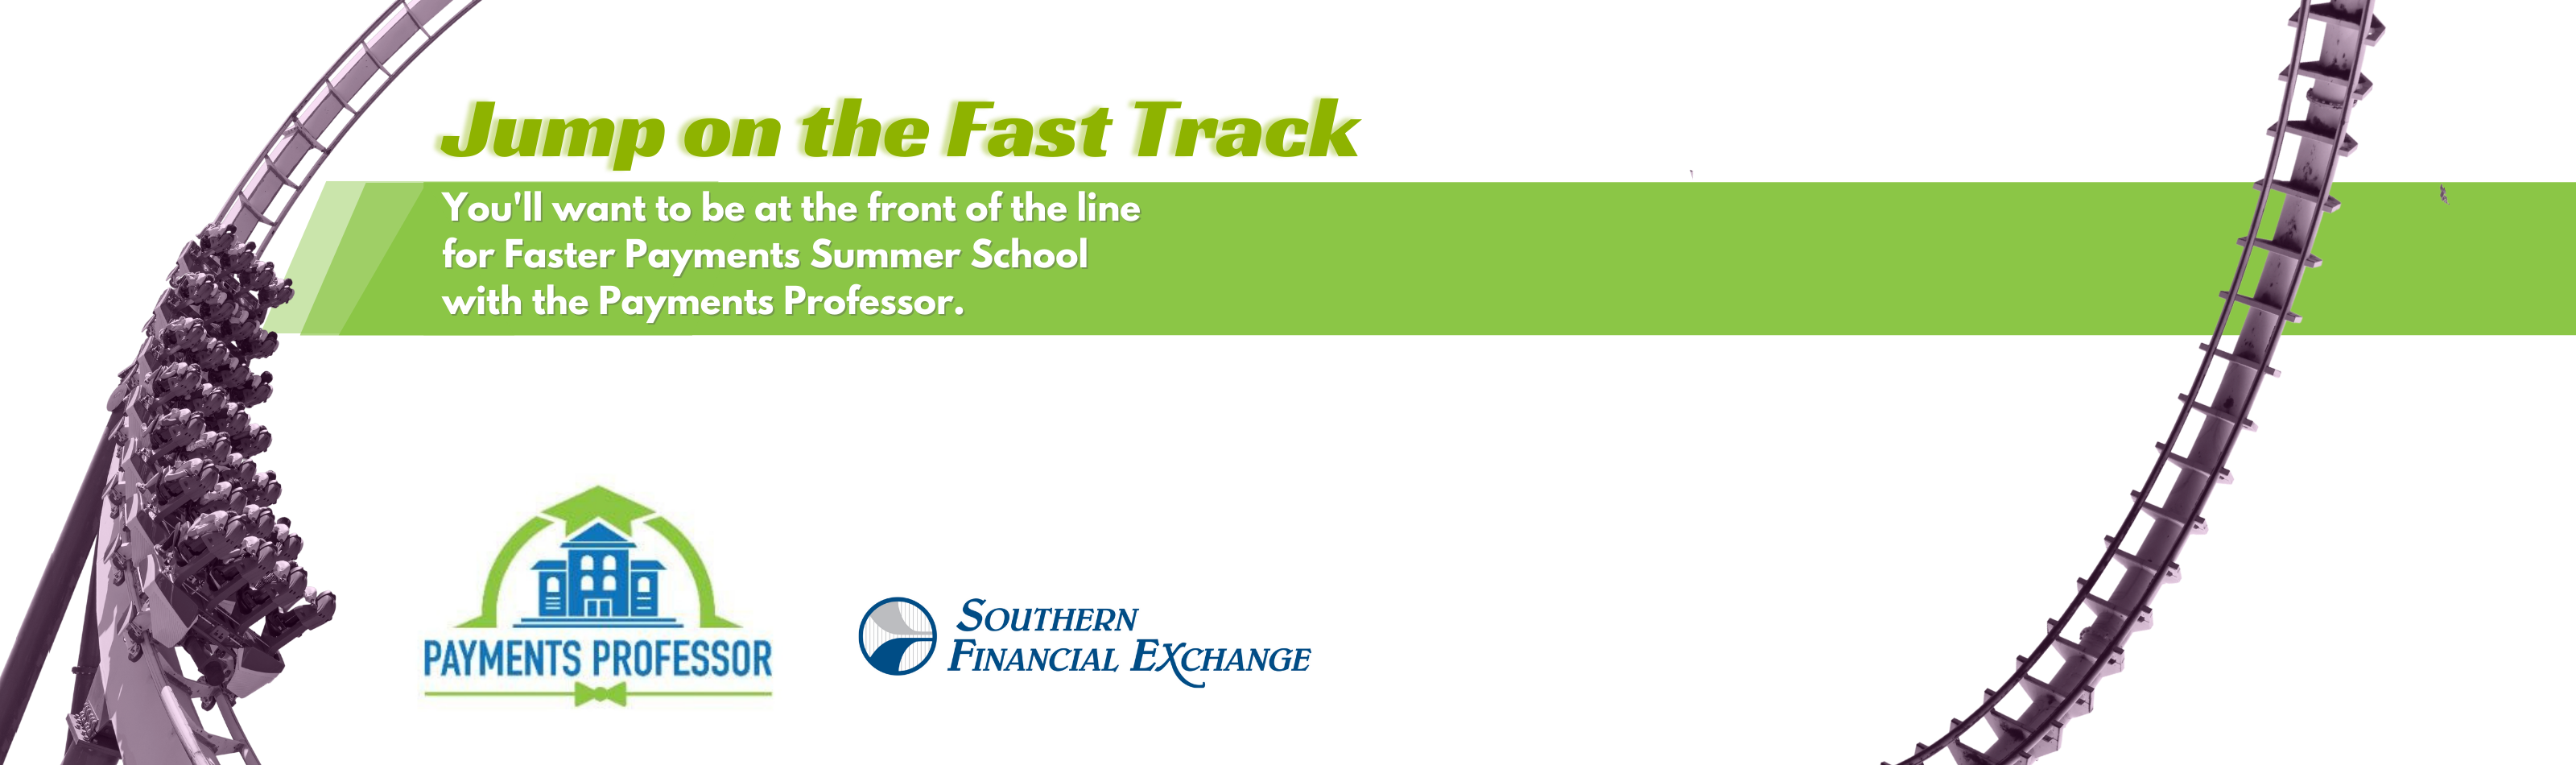 Faster Payments Summer School